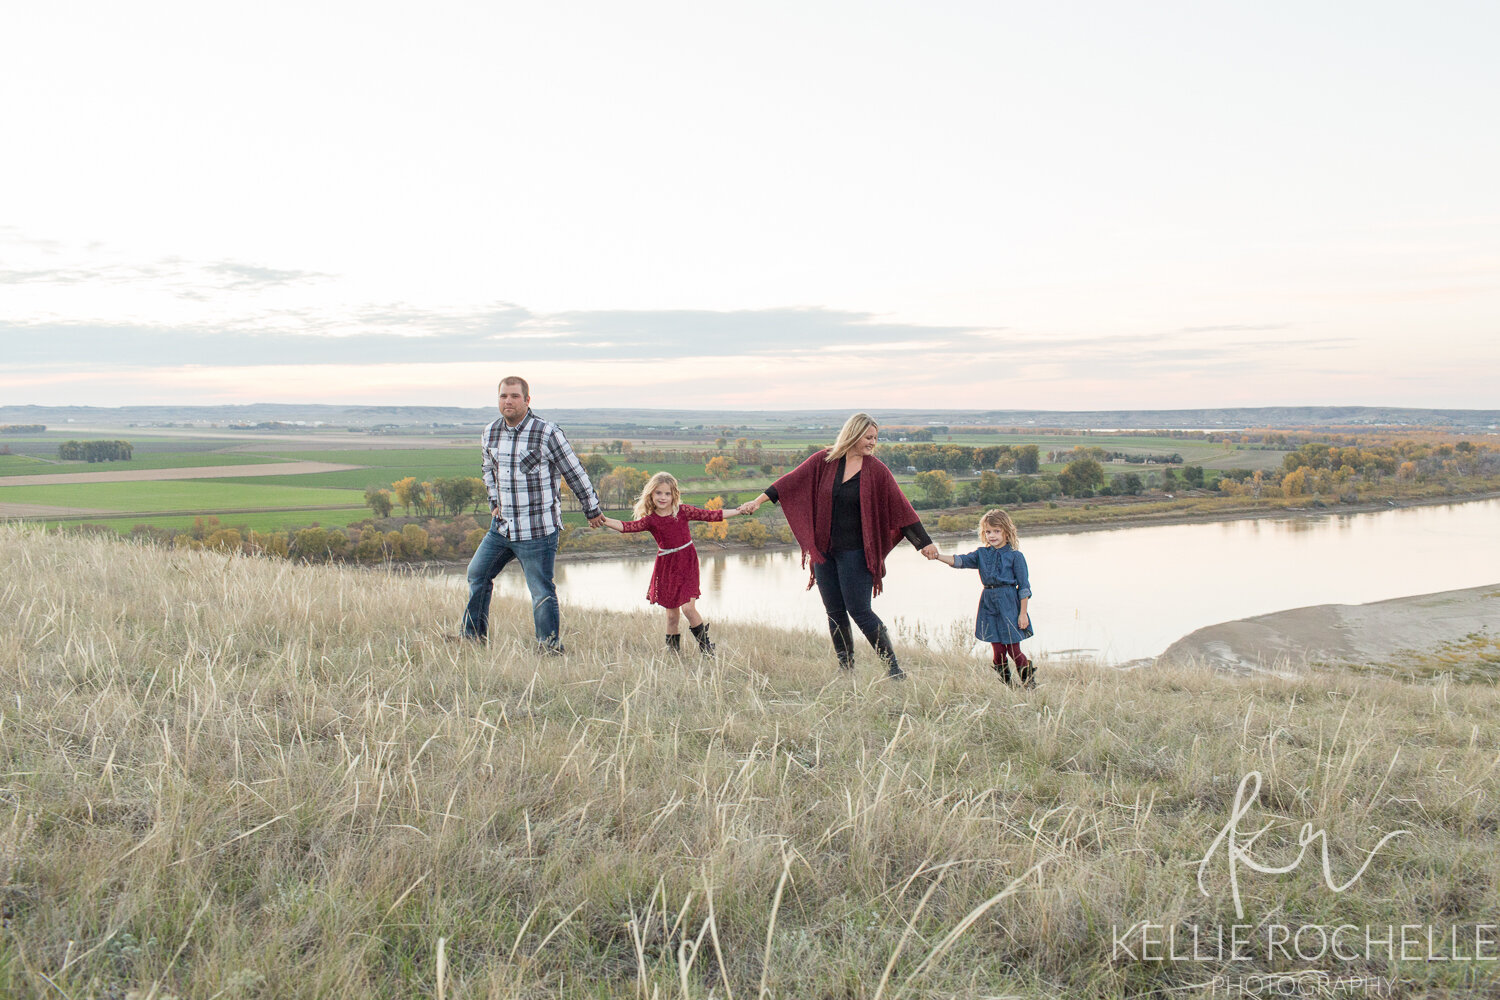 family walking together in nature wearing maroon colors in fall